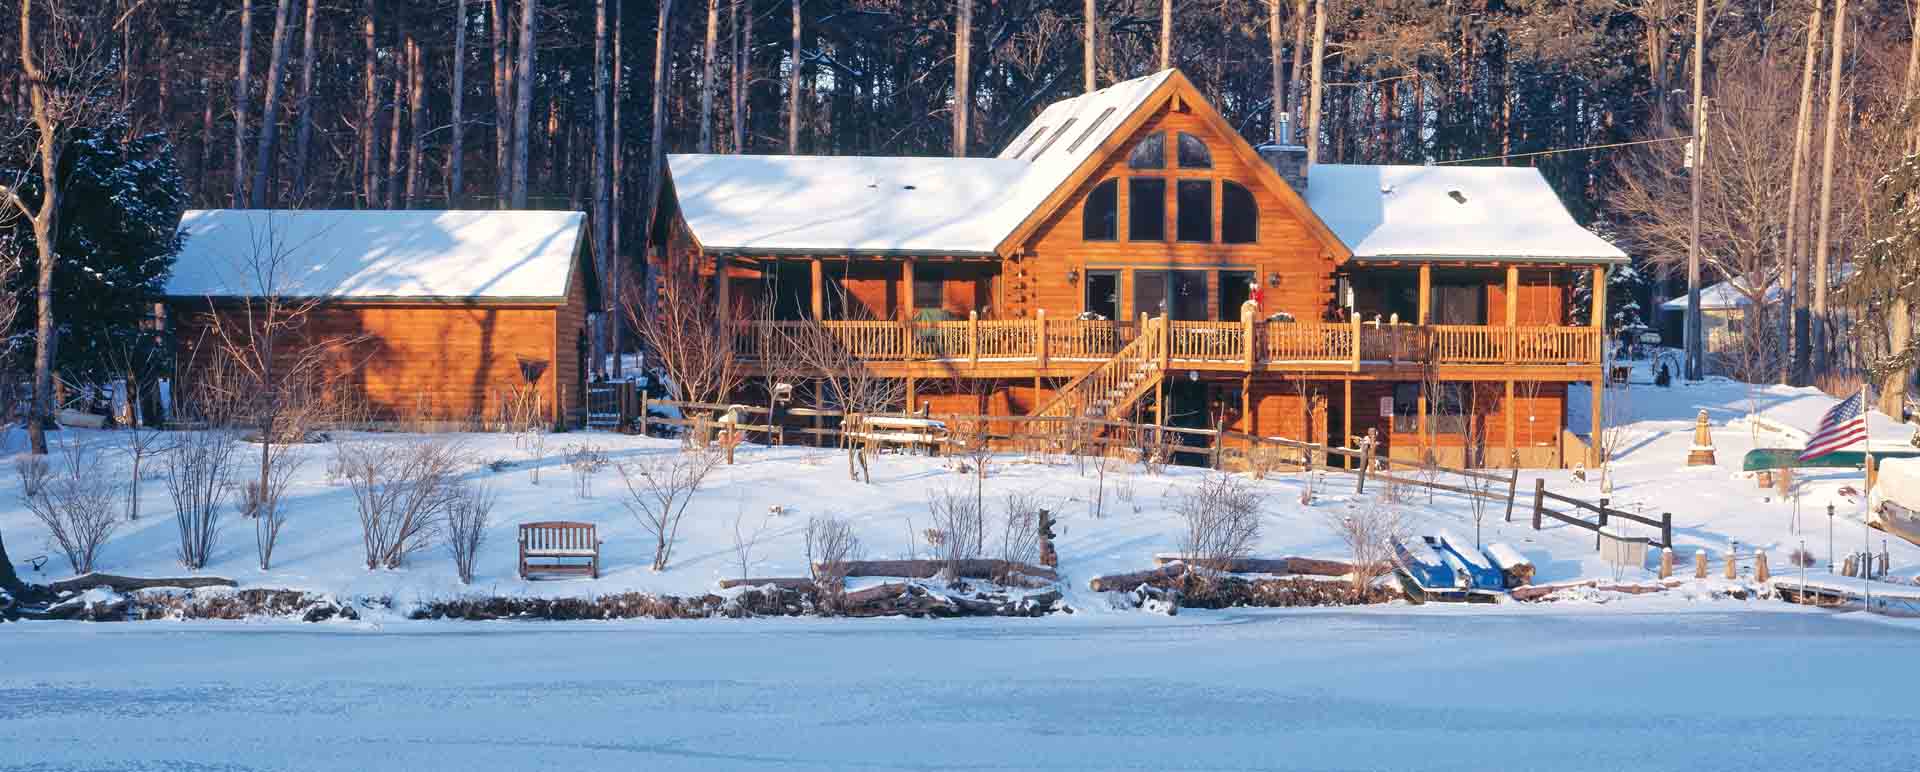 Enjoying Time Spent in the Great Indoors – Log Home Style